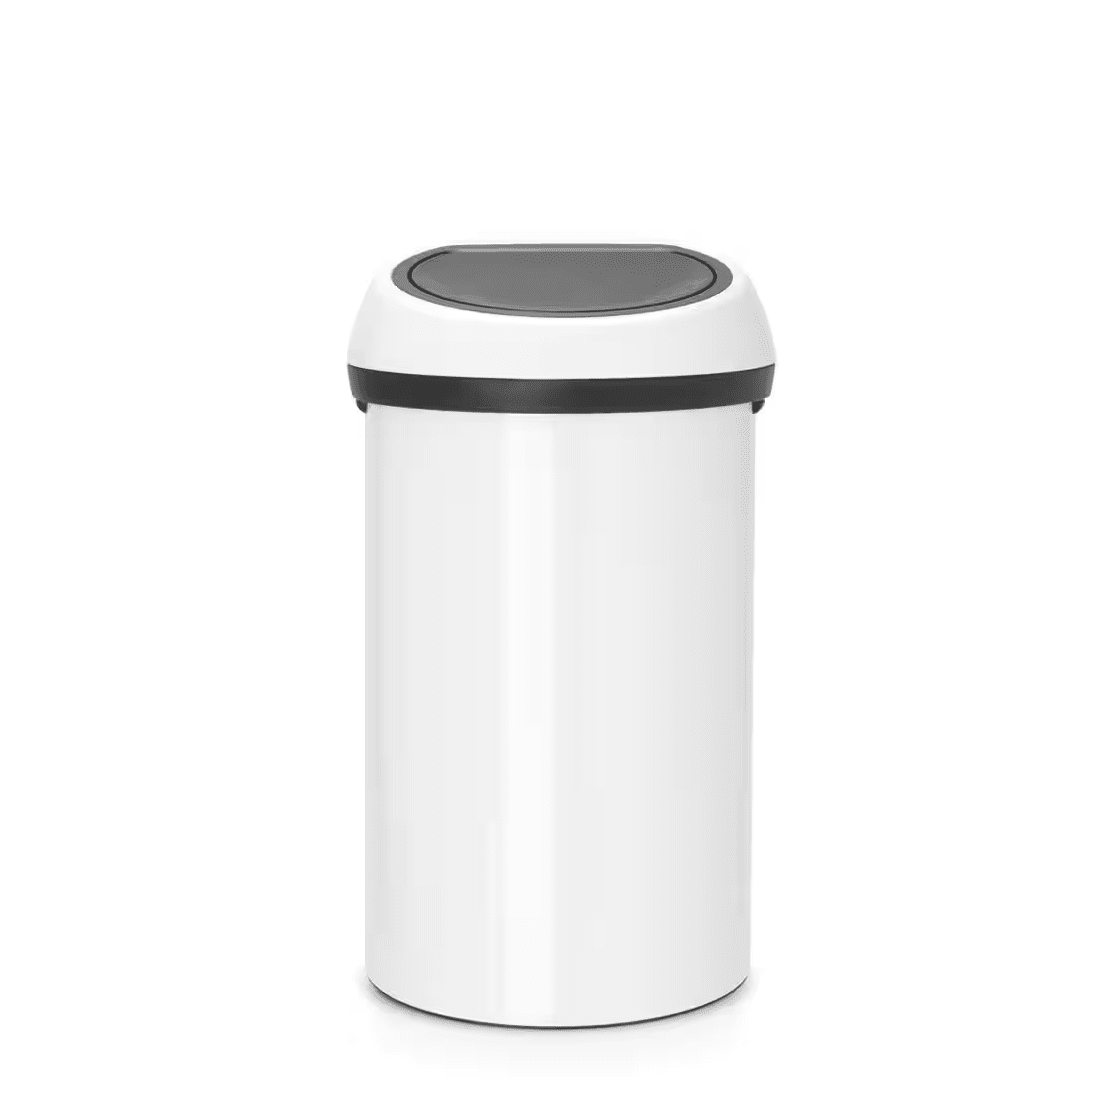 https://cdn.apartmenttherapy.info/image/upload/v1691085181/gen-workflow/product-database/Brabantia-White-Steel-Touch-Top-Trash-Can.png